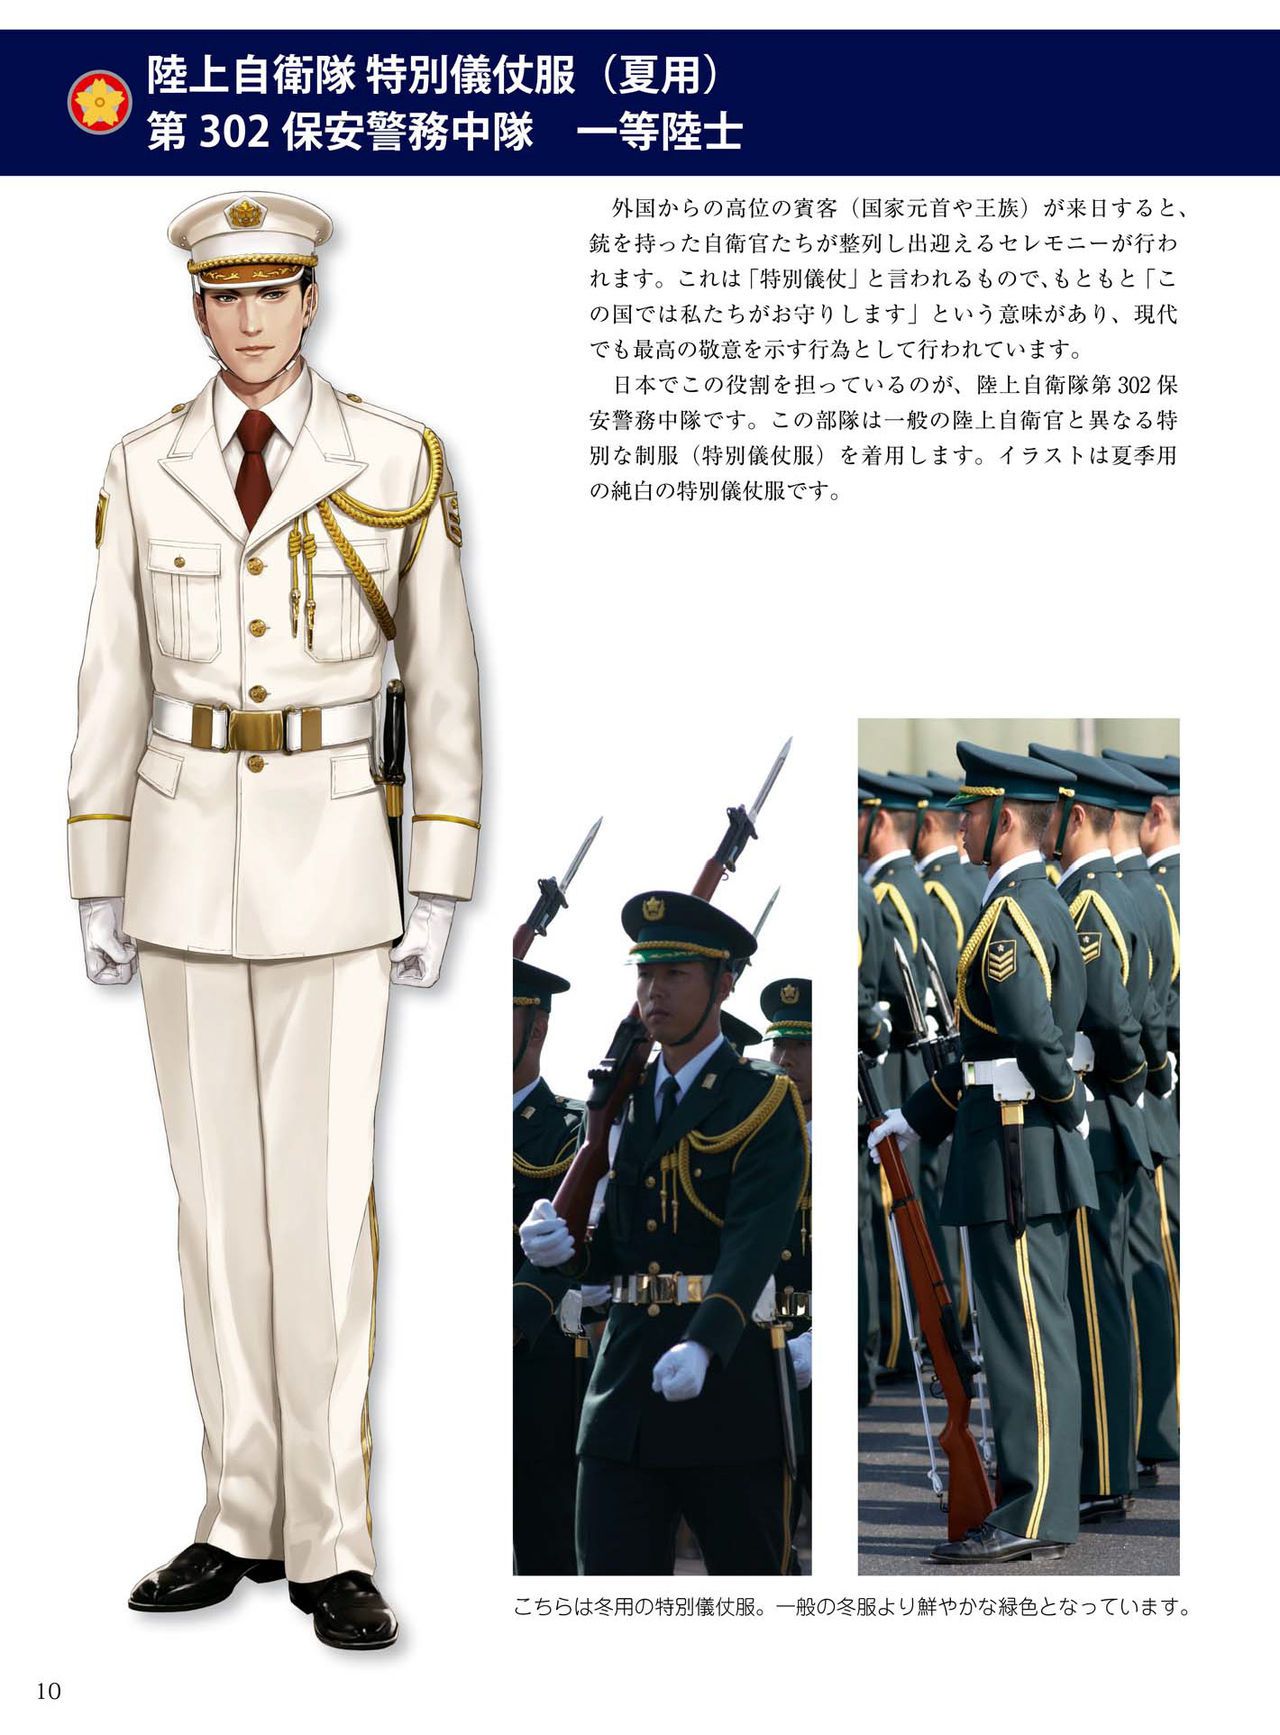 How to draw military uniforms and uniforms From Self-Defense Forces 軍服・制服の描き方 アメリカ軍・自衛隊の制服から戦闘服まで 13